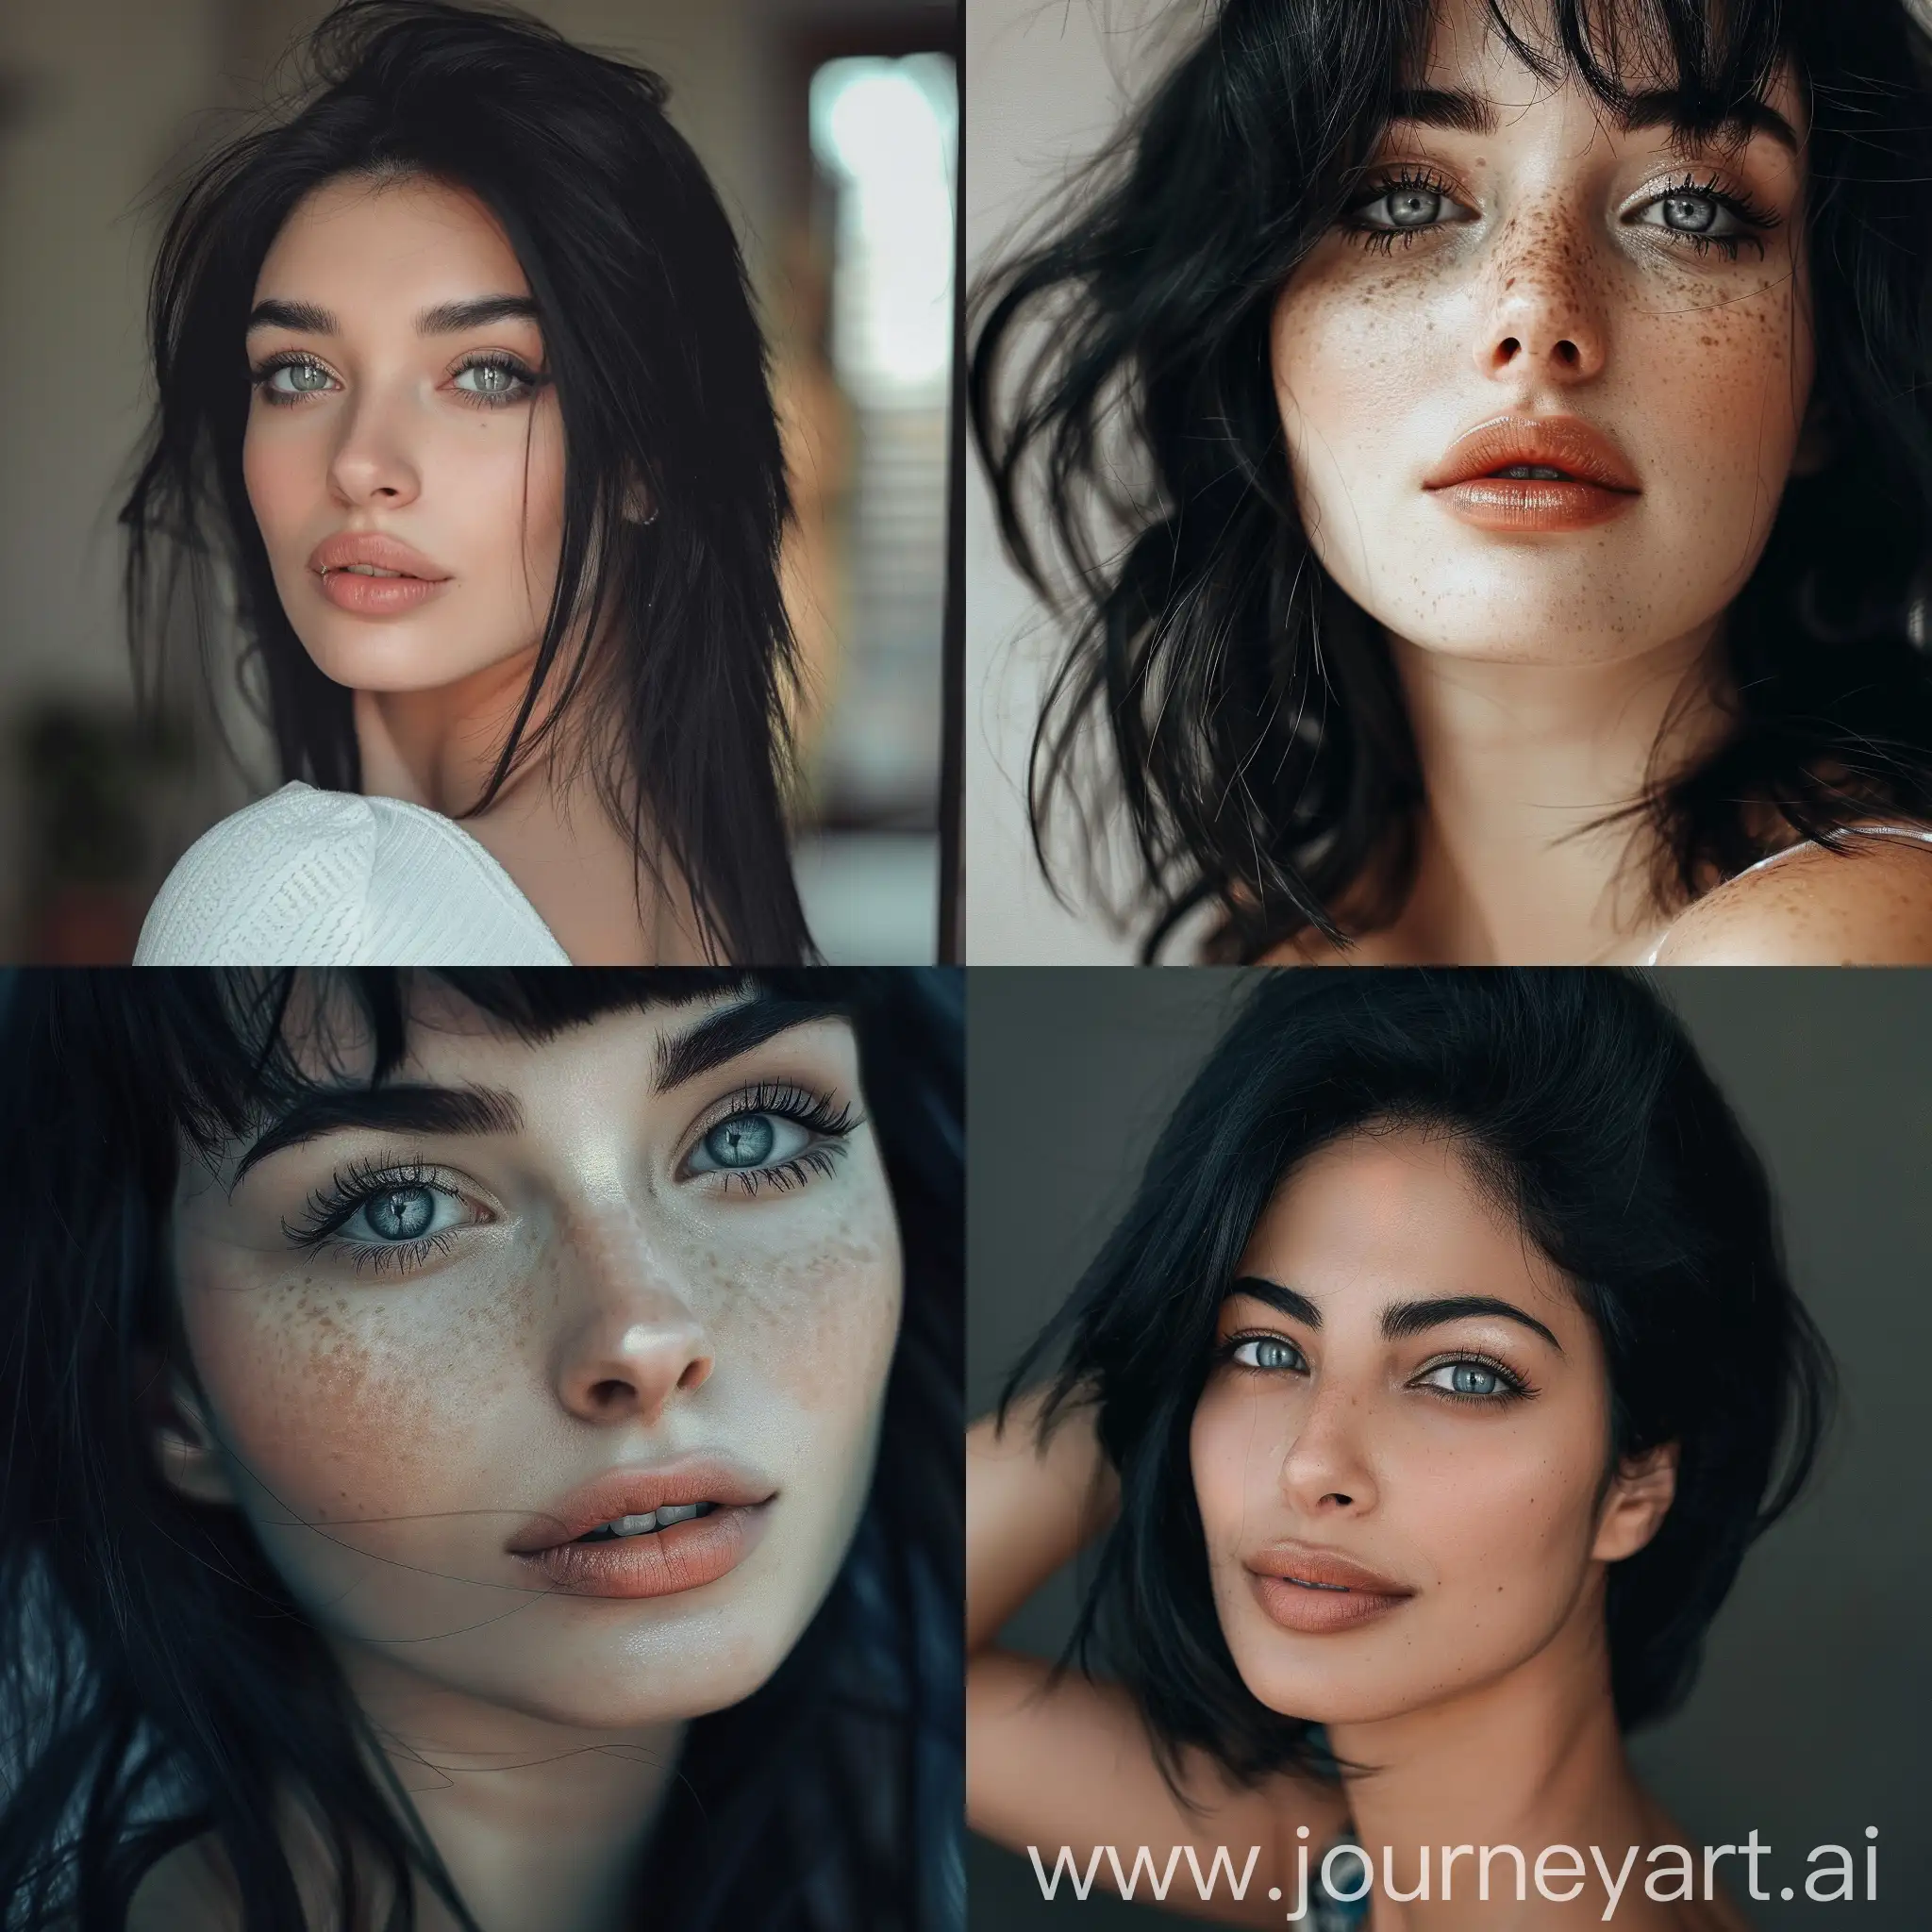 A beutiful woman with black hair and pretty grey eyes